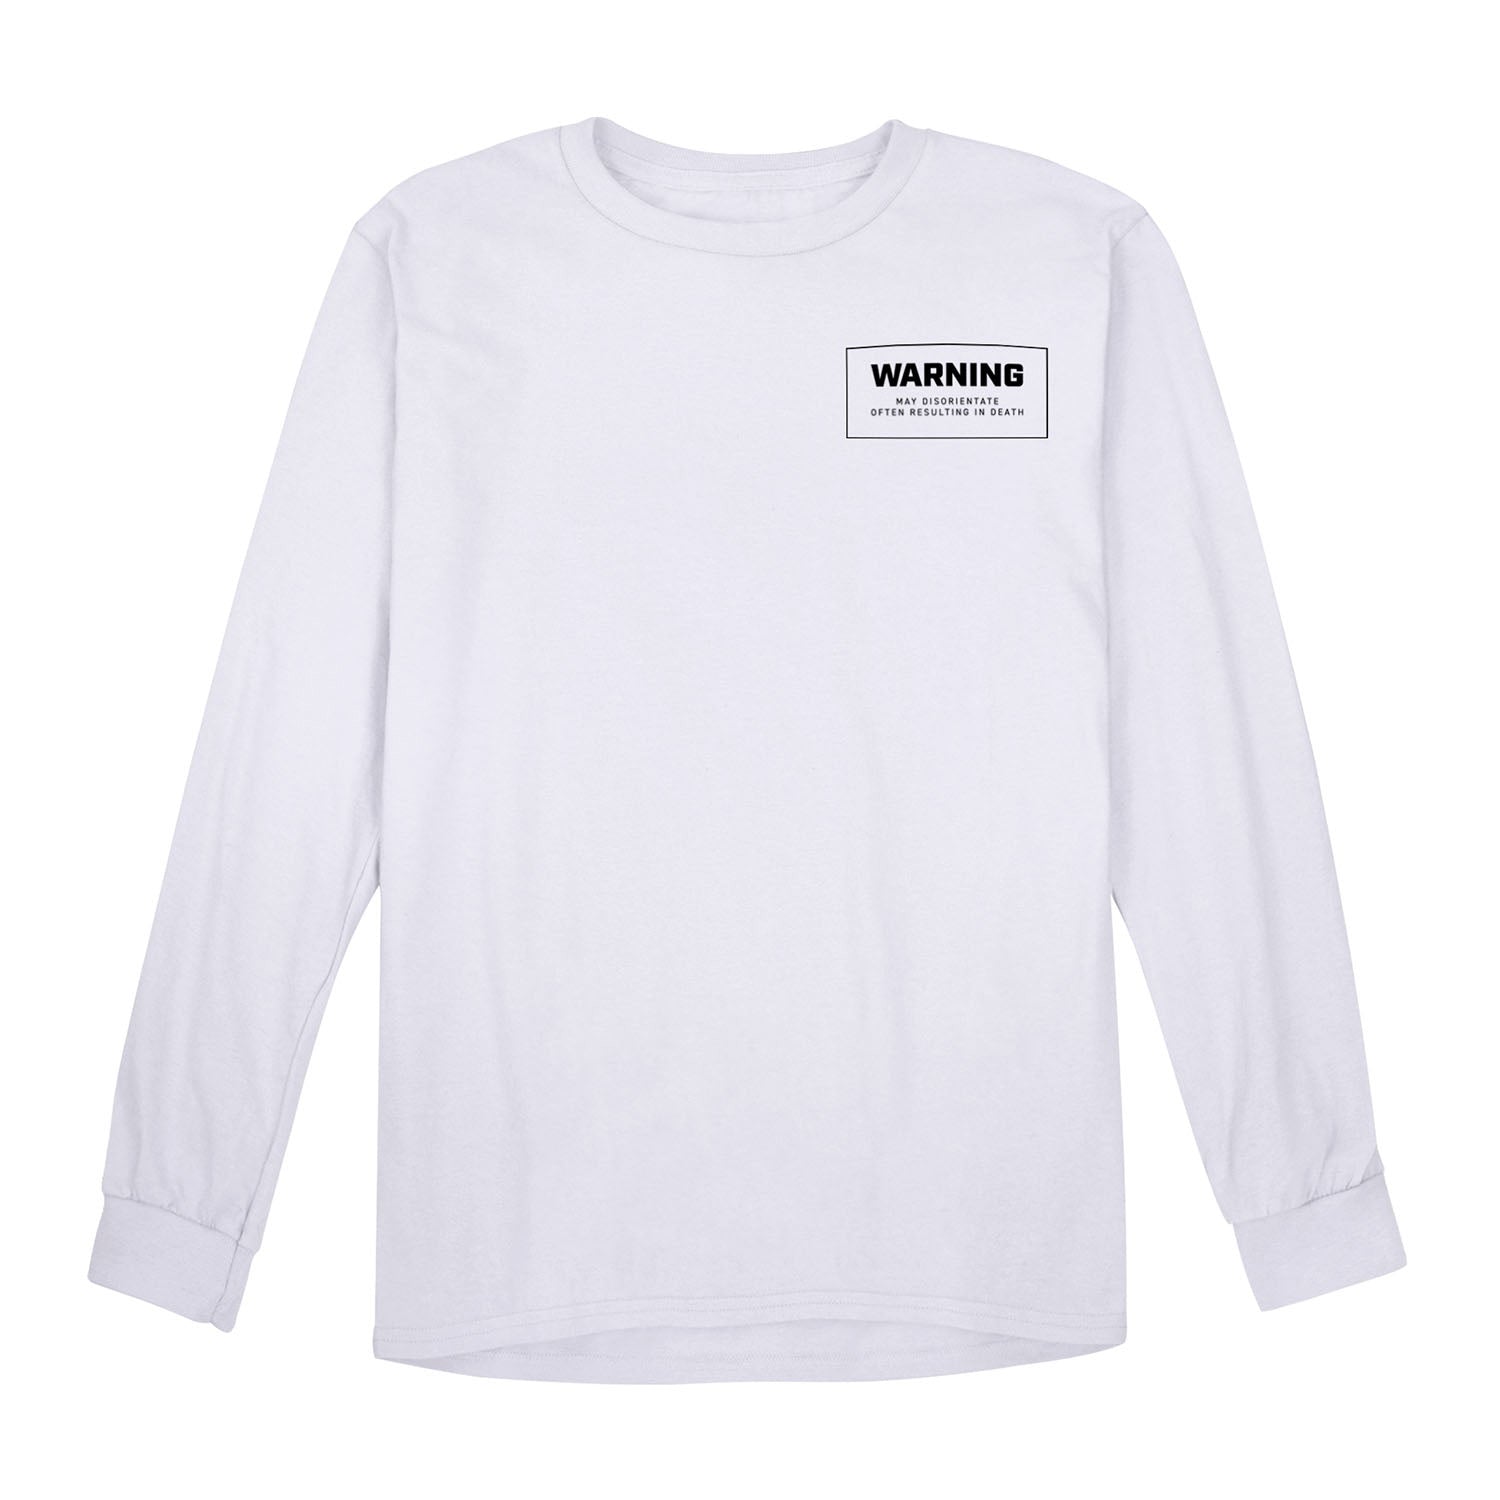 Call of Duty Stunned White Long Sleeve T-Shirt - Front View